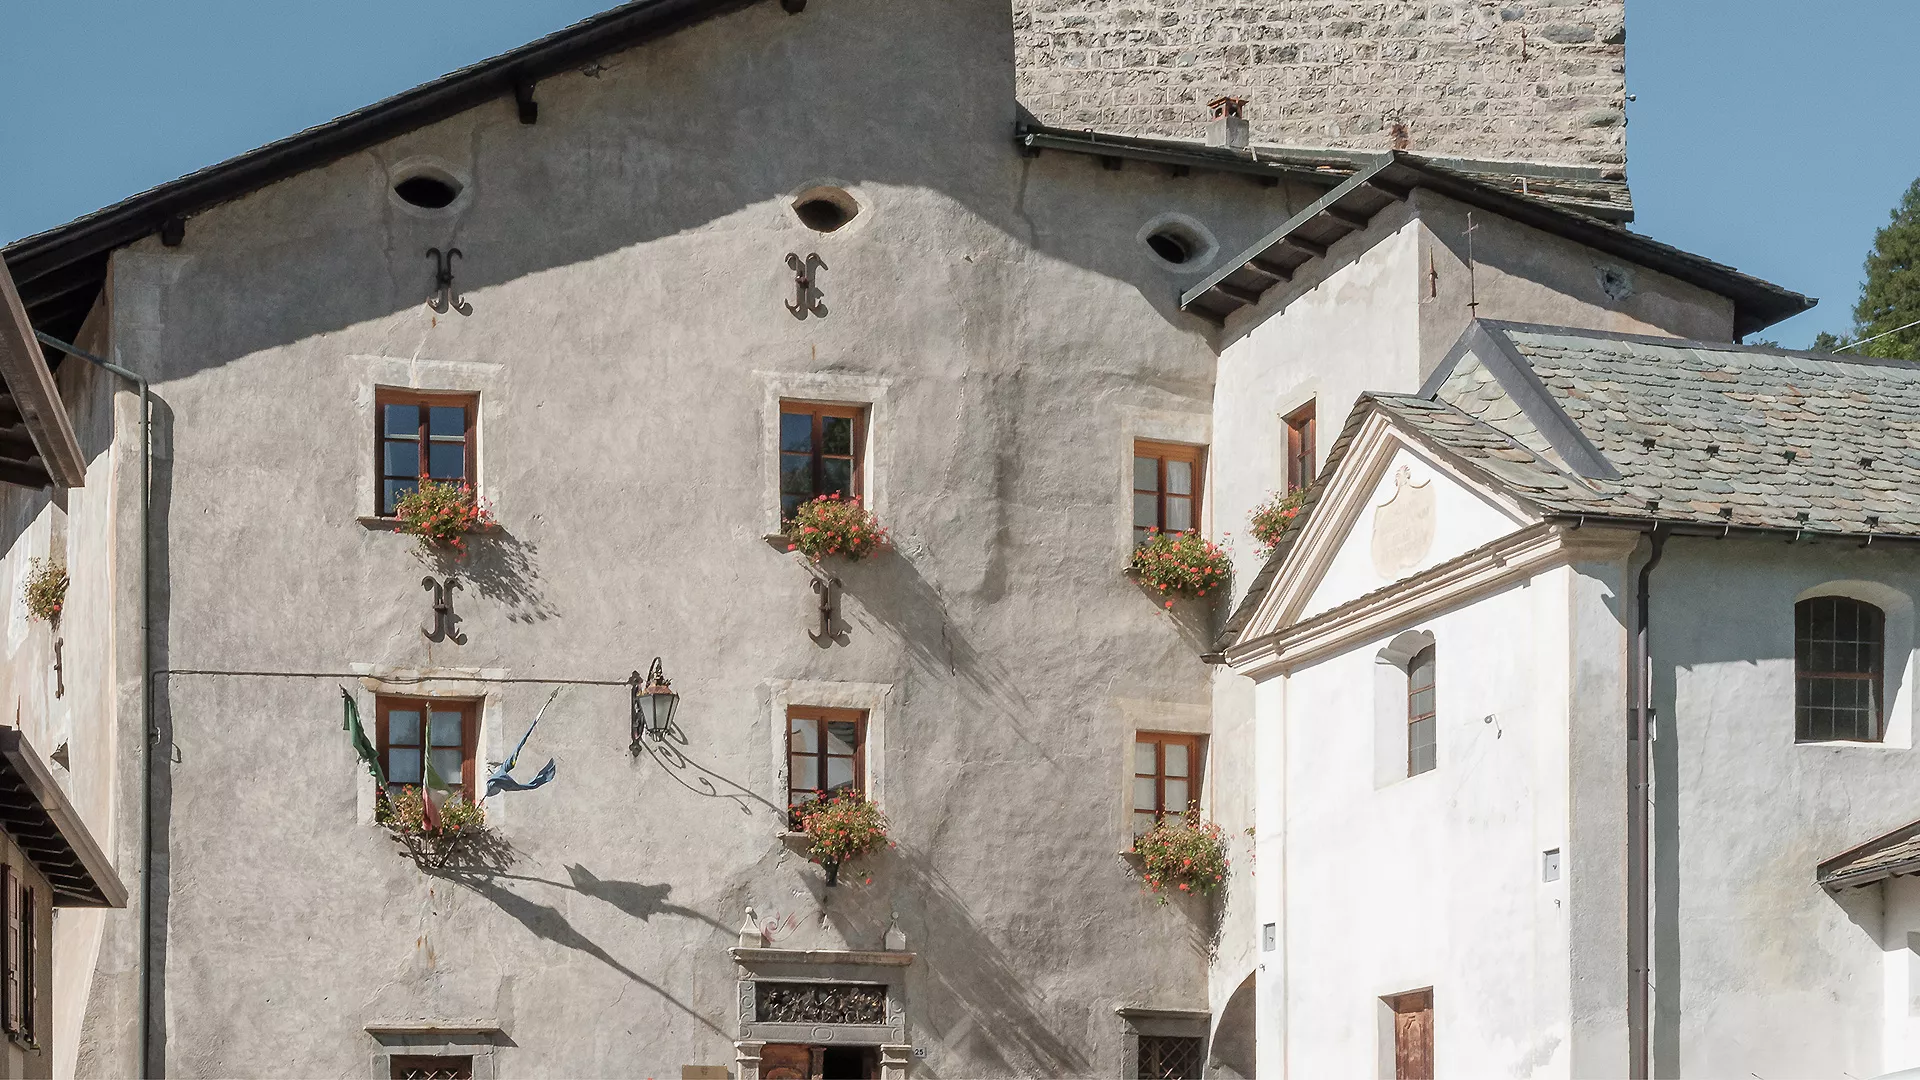 Museum Civico di Bormio in Italy, Europe | Museums - Rated 0.8